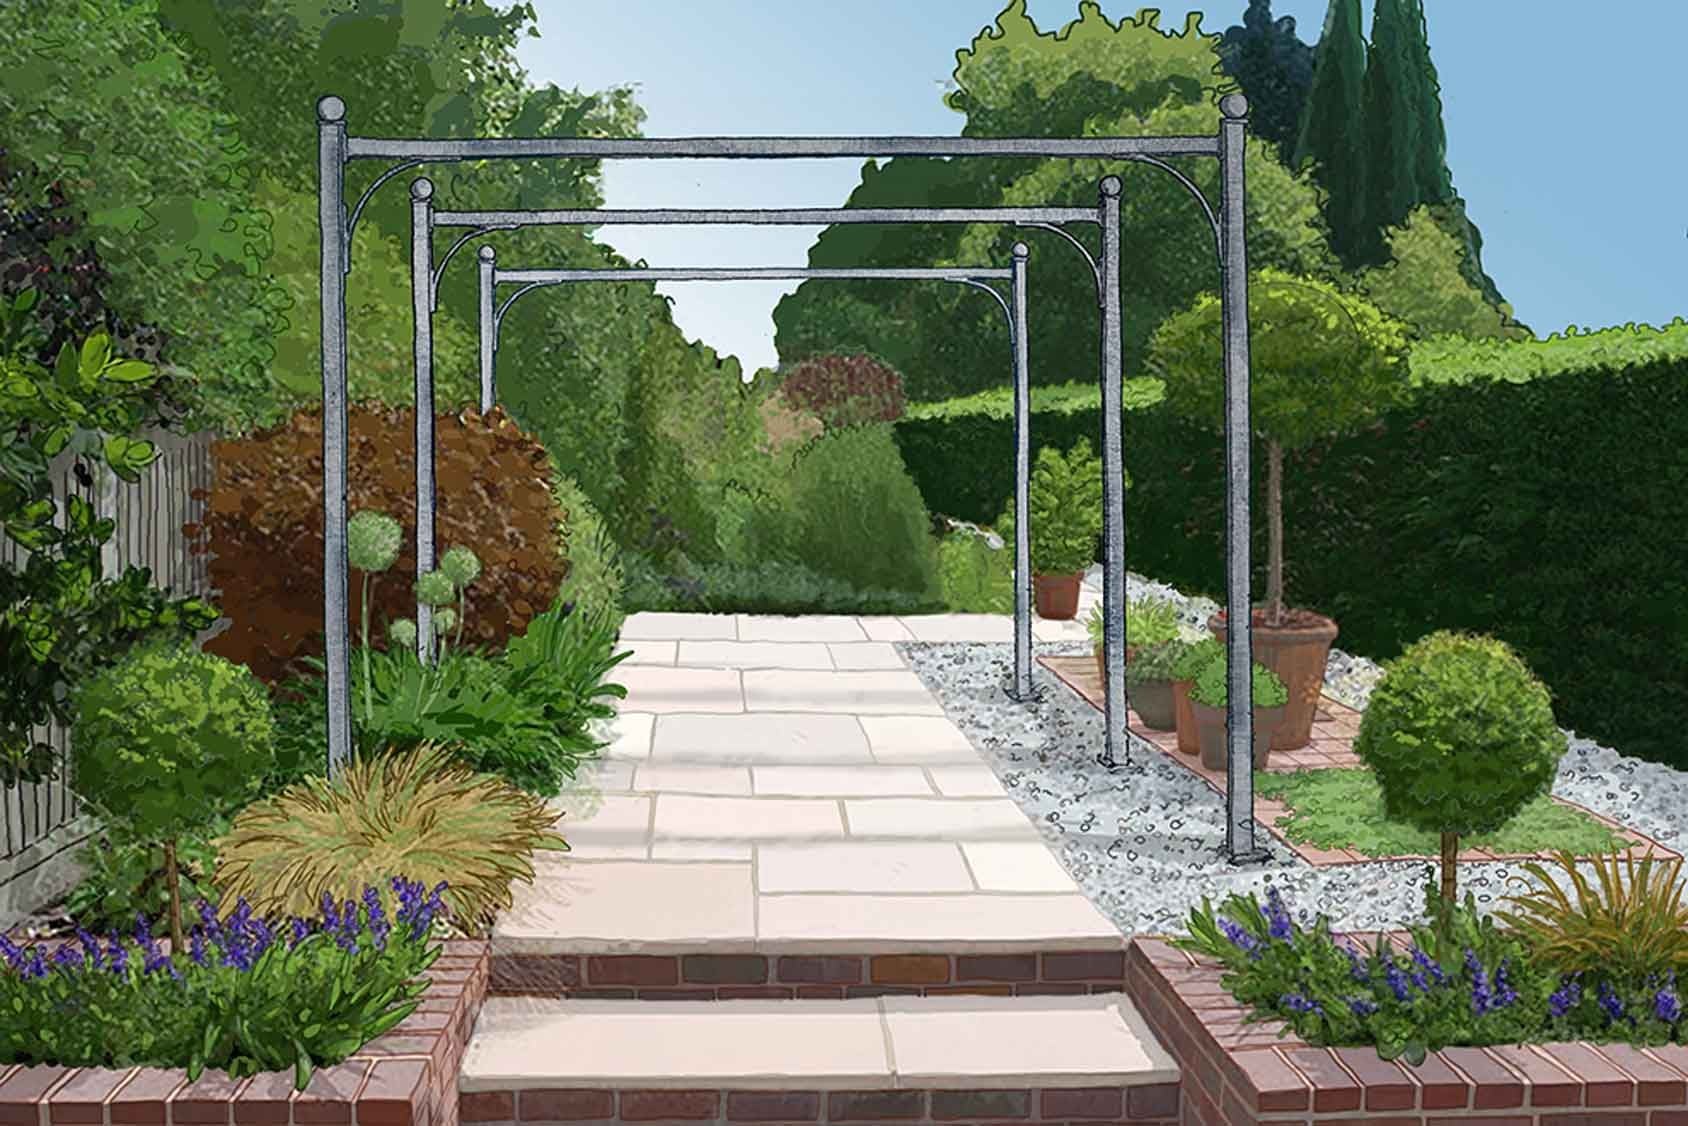 Traditional Single Hoop Arch from Harrod Horticultural